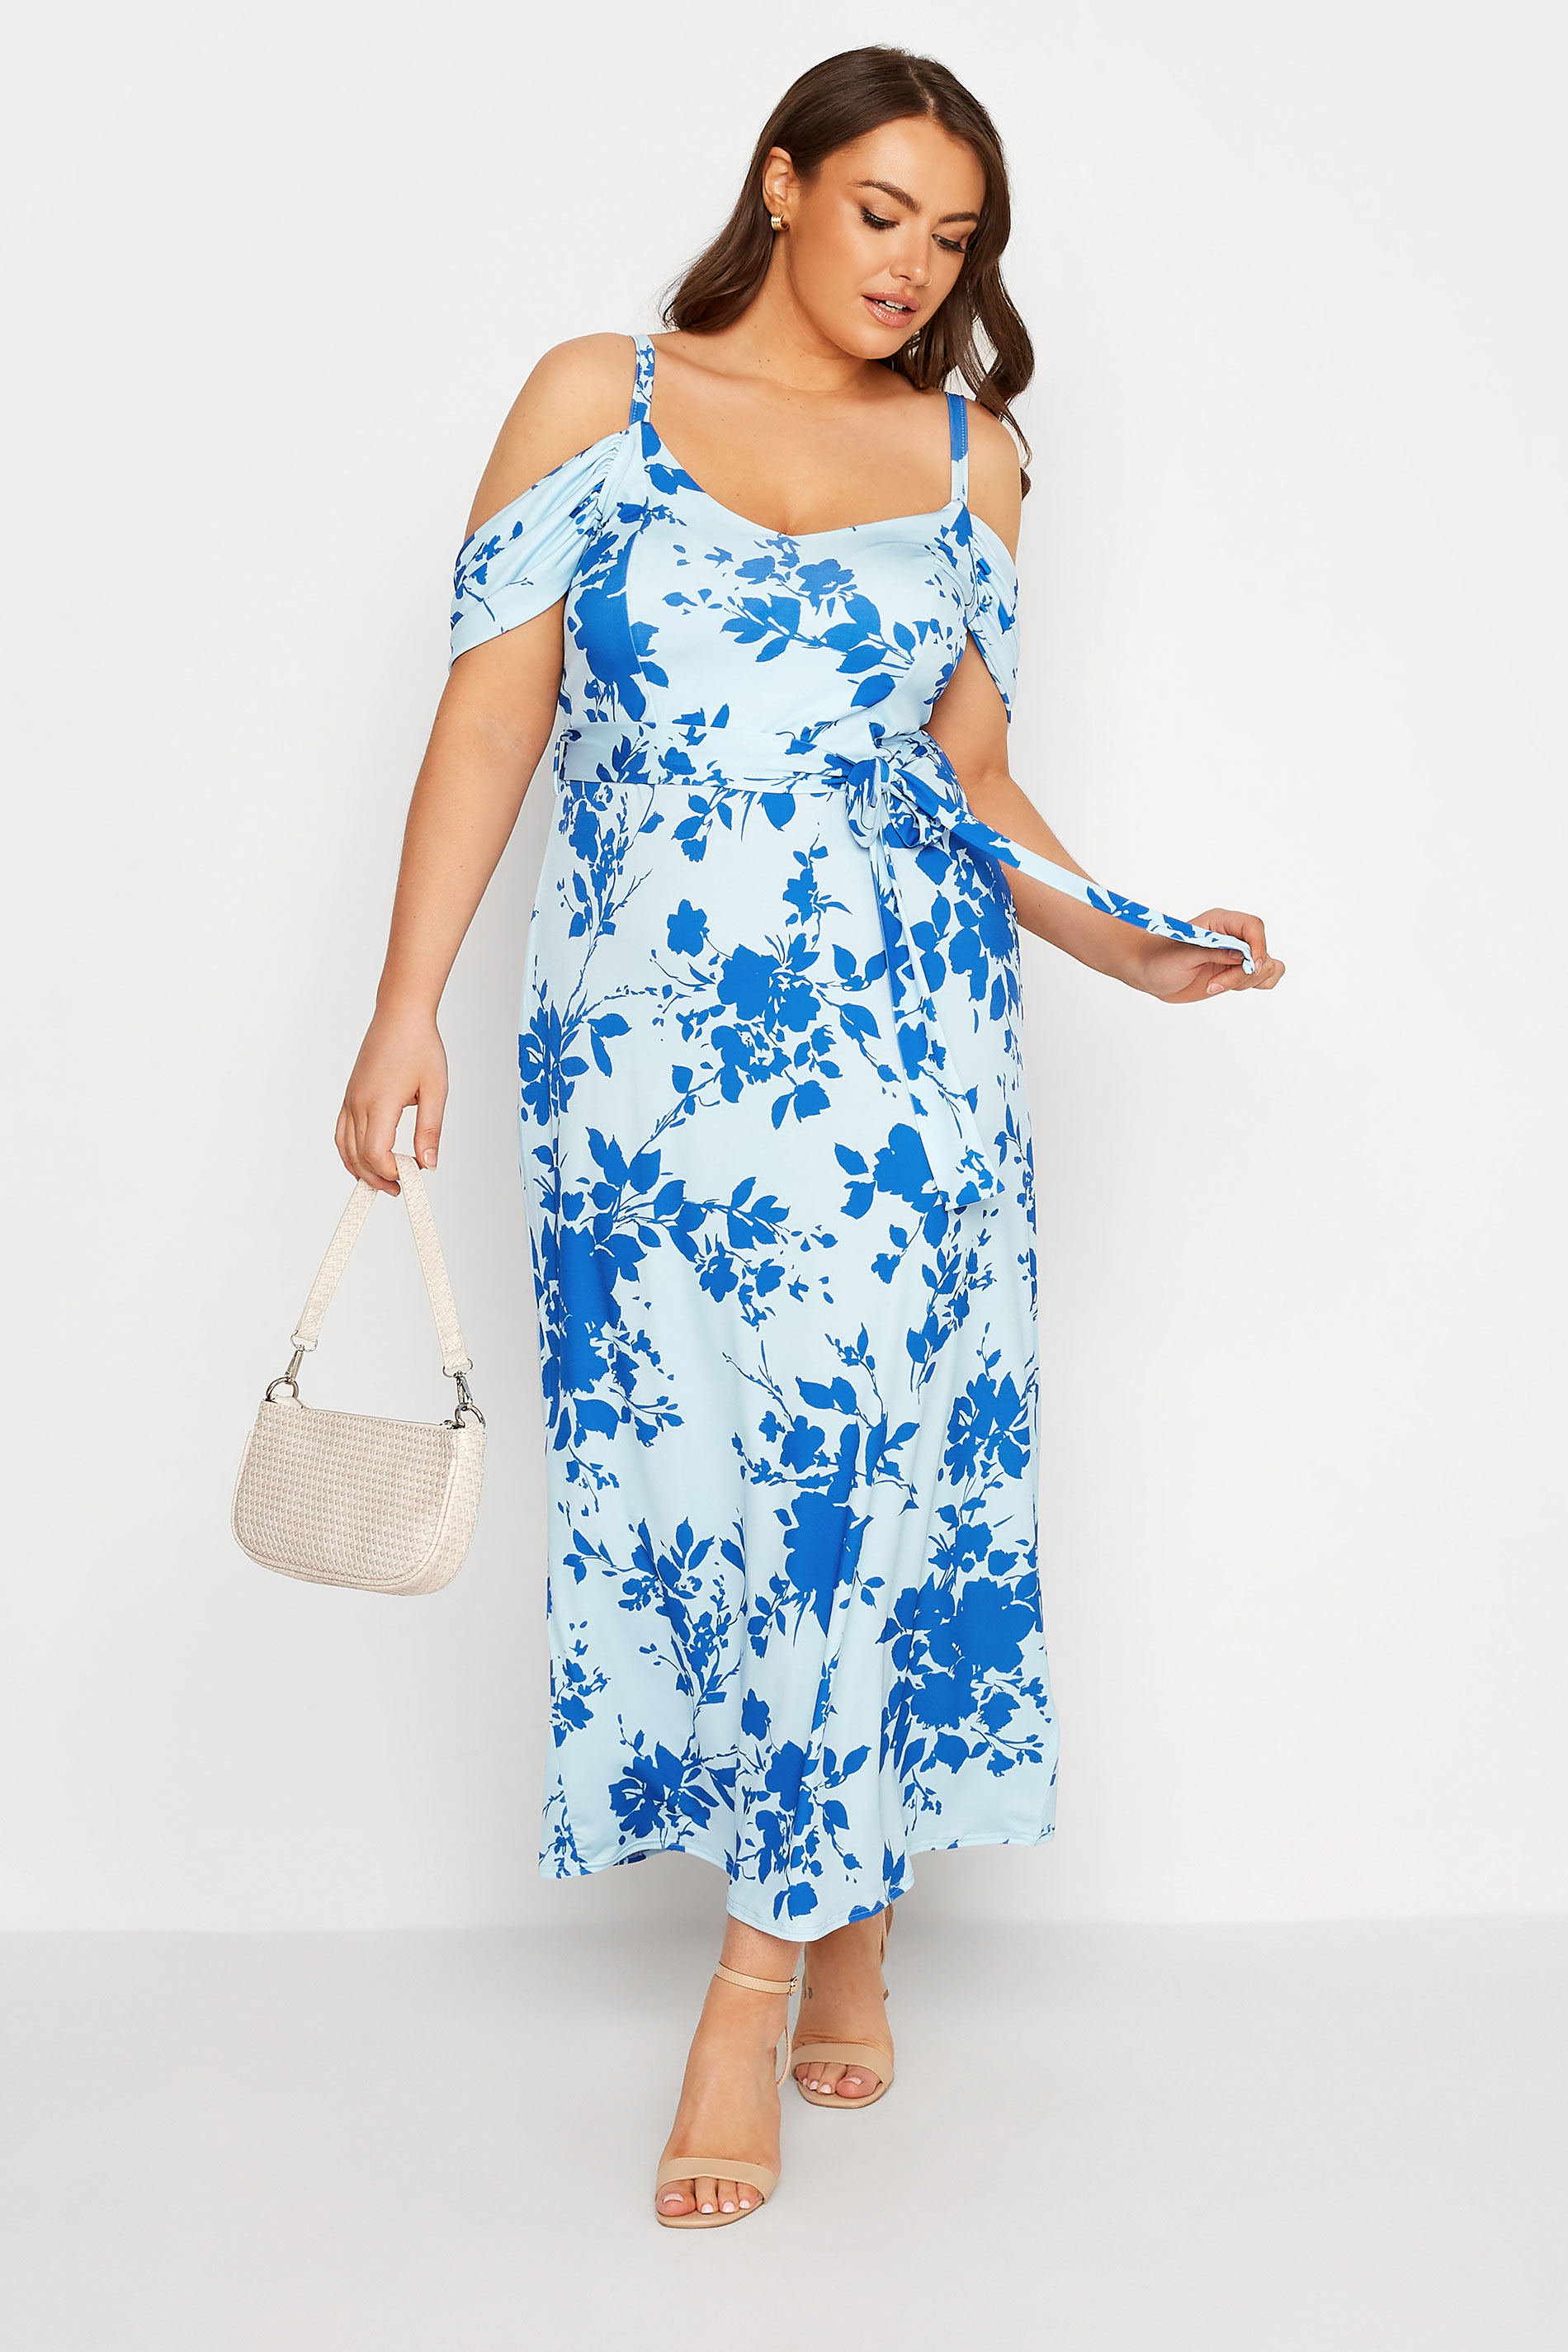 Robes Grande Taille Grande taille  Robes Longues | YOURS LONDON - Robe Bleue Ciel Floral Design Bardot - LY03859